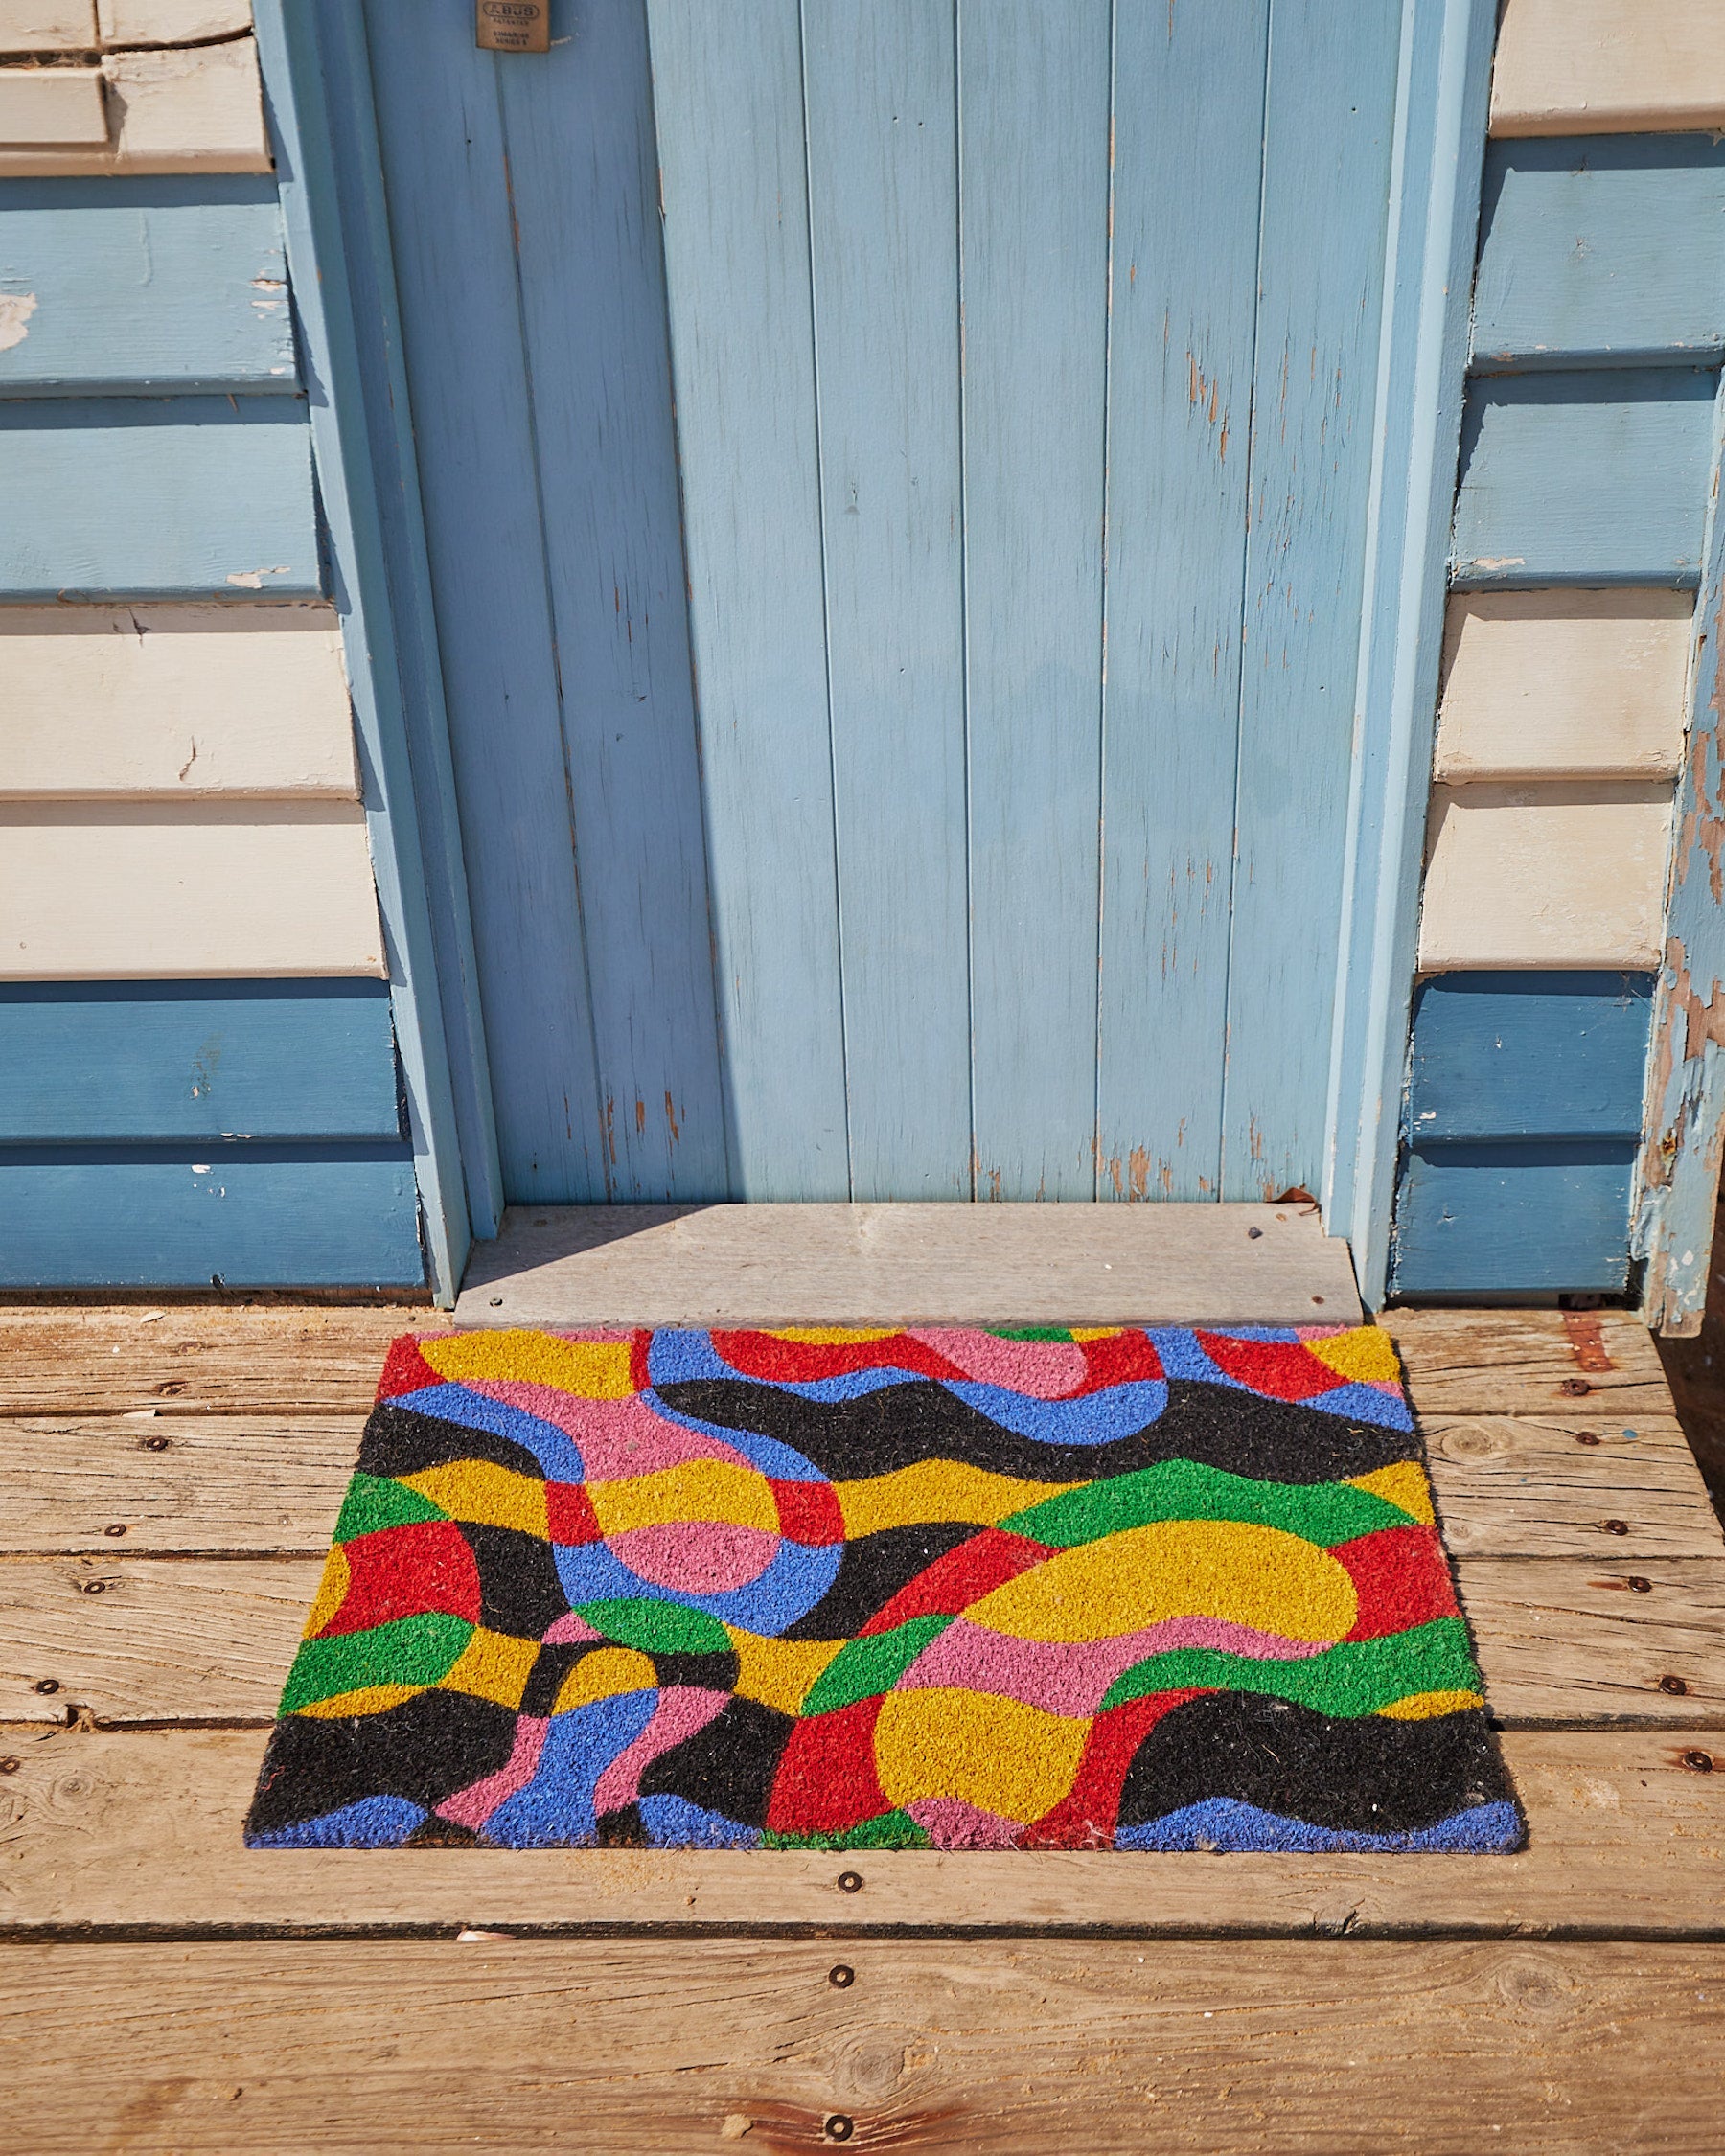 Coco Coir Doormat, Ethically Sourced